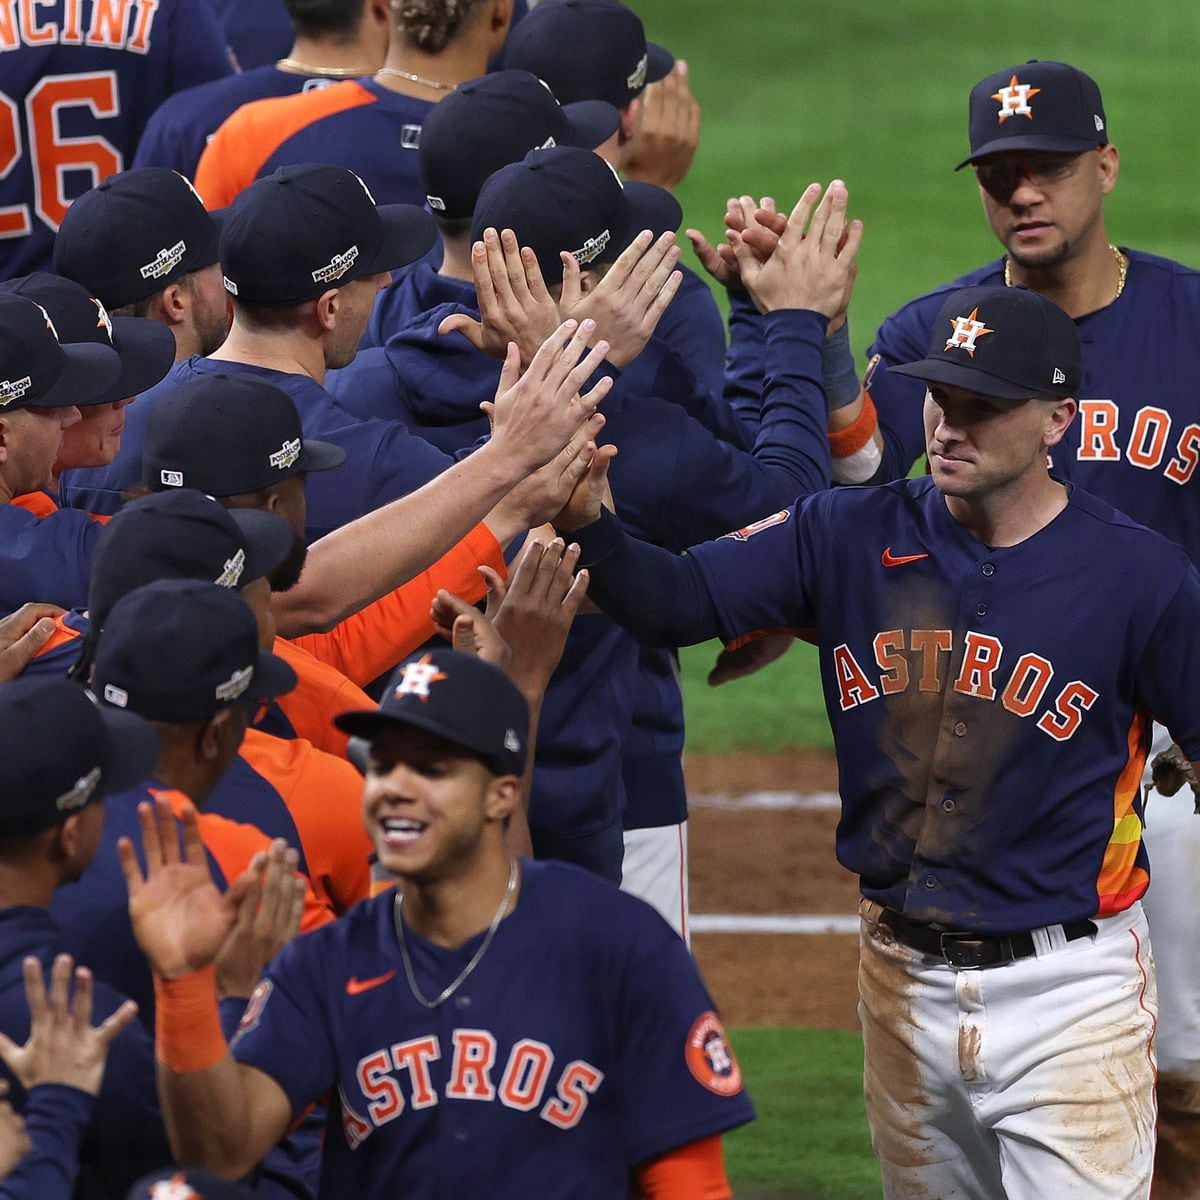 Astros 6, Yankees 5: How Houston advanced to another World Series